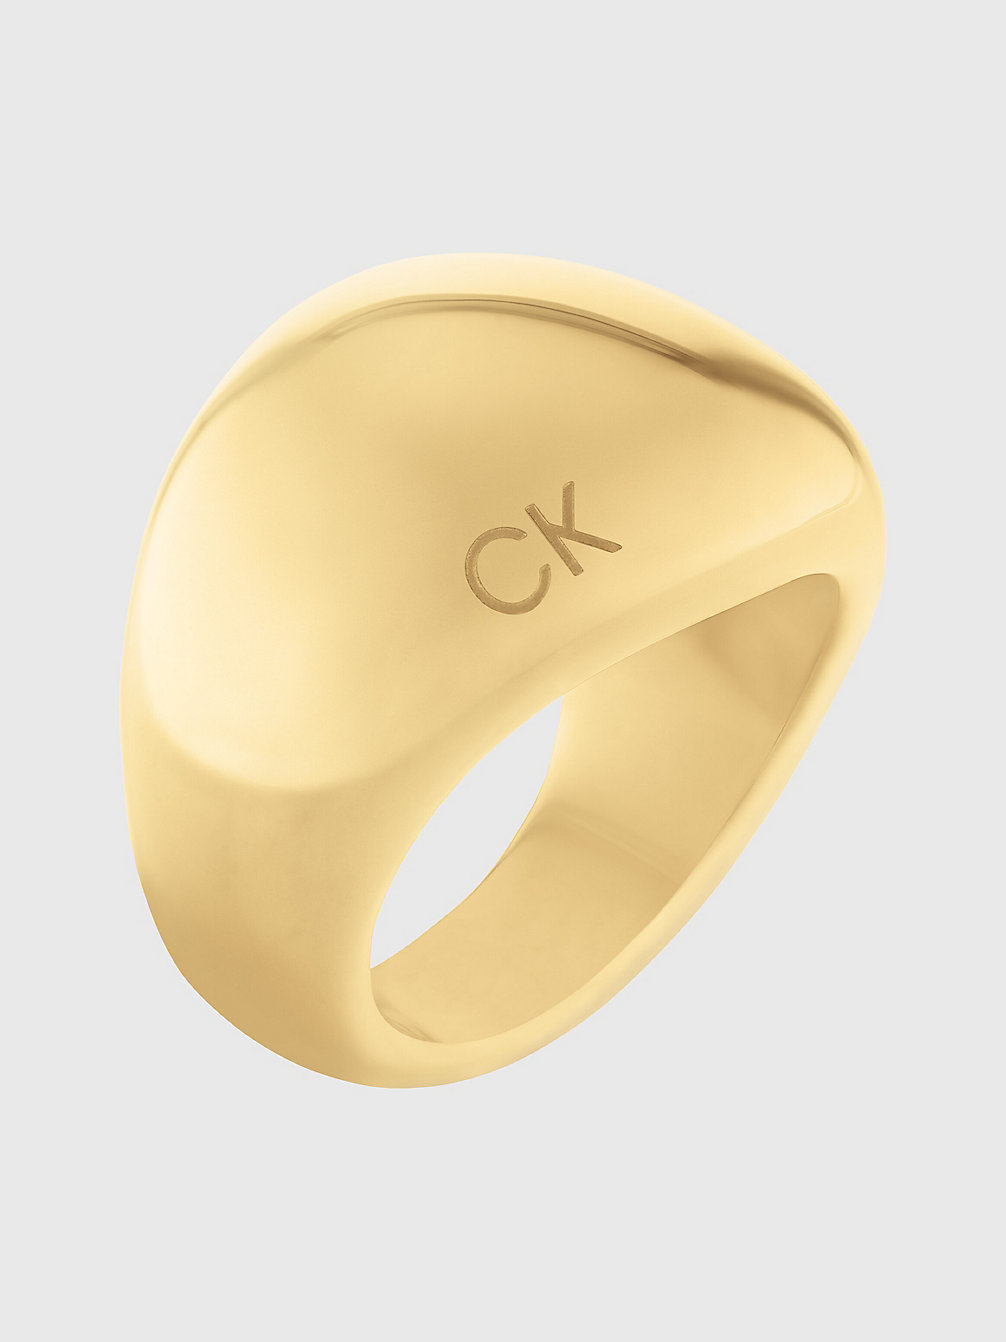 Anillo - Playful Organic Shapes > GOLD > undefined mujer > Calvin Klein